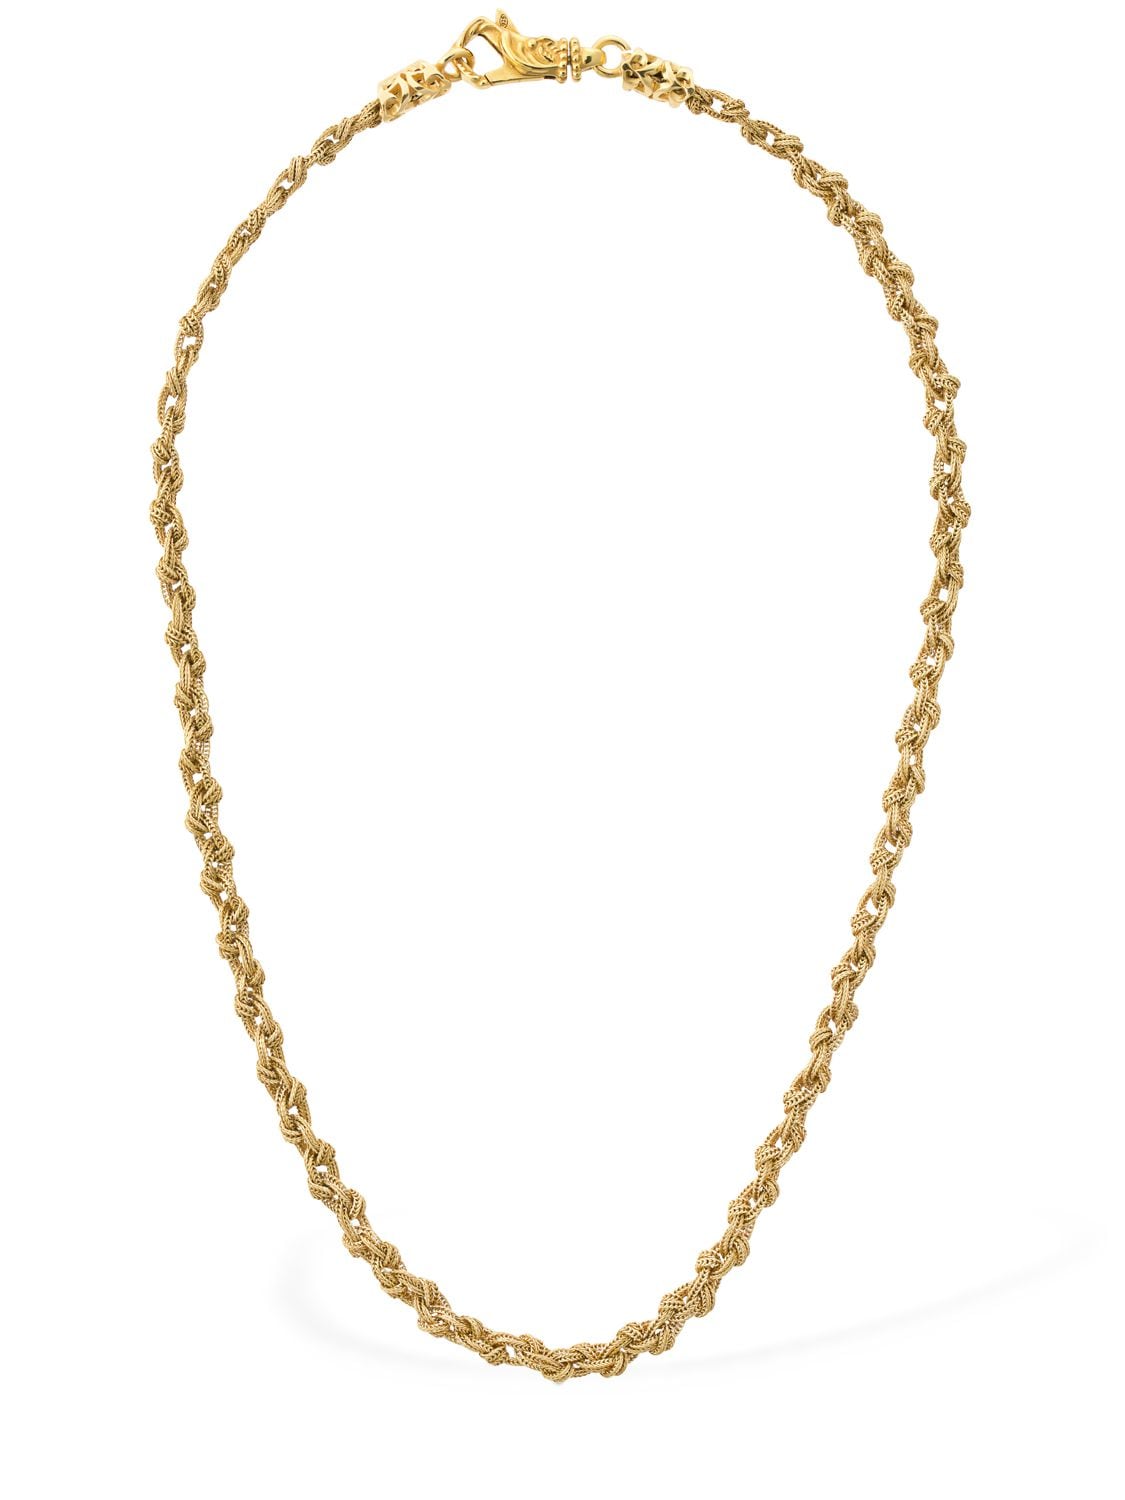 Image of Braided Knot Chain Necklace